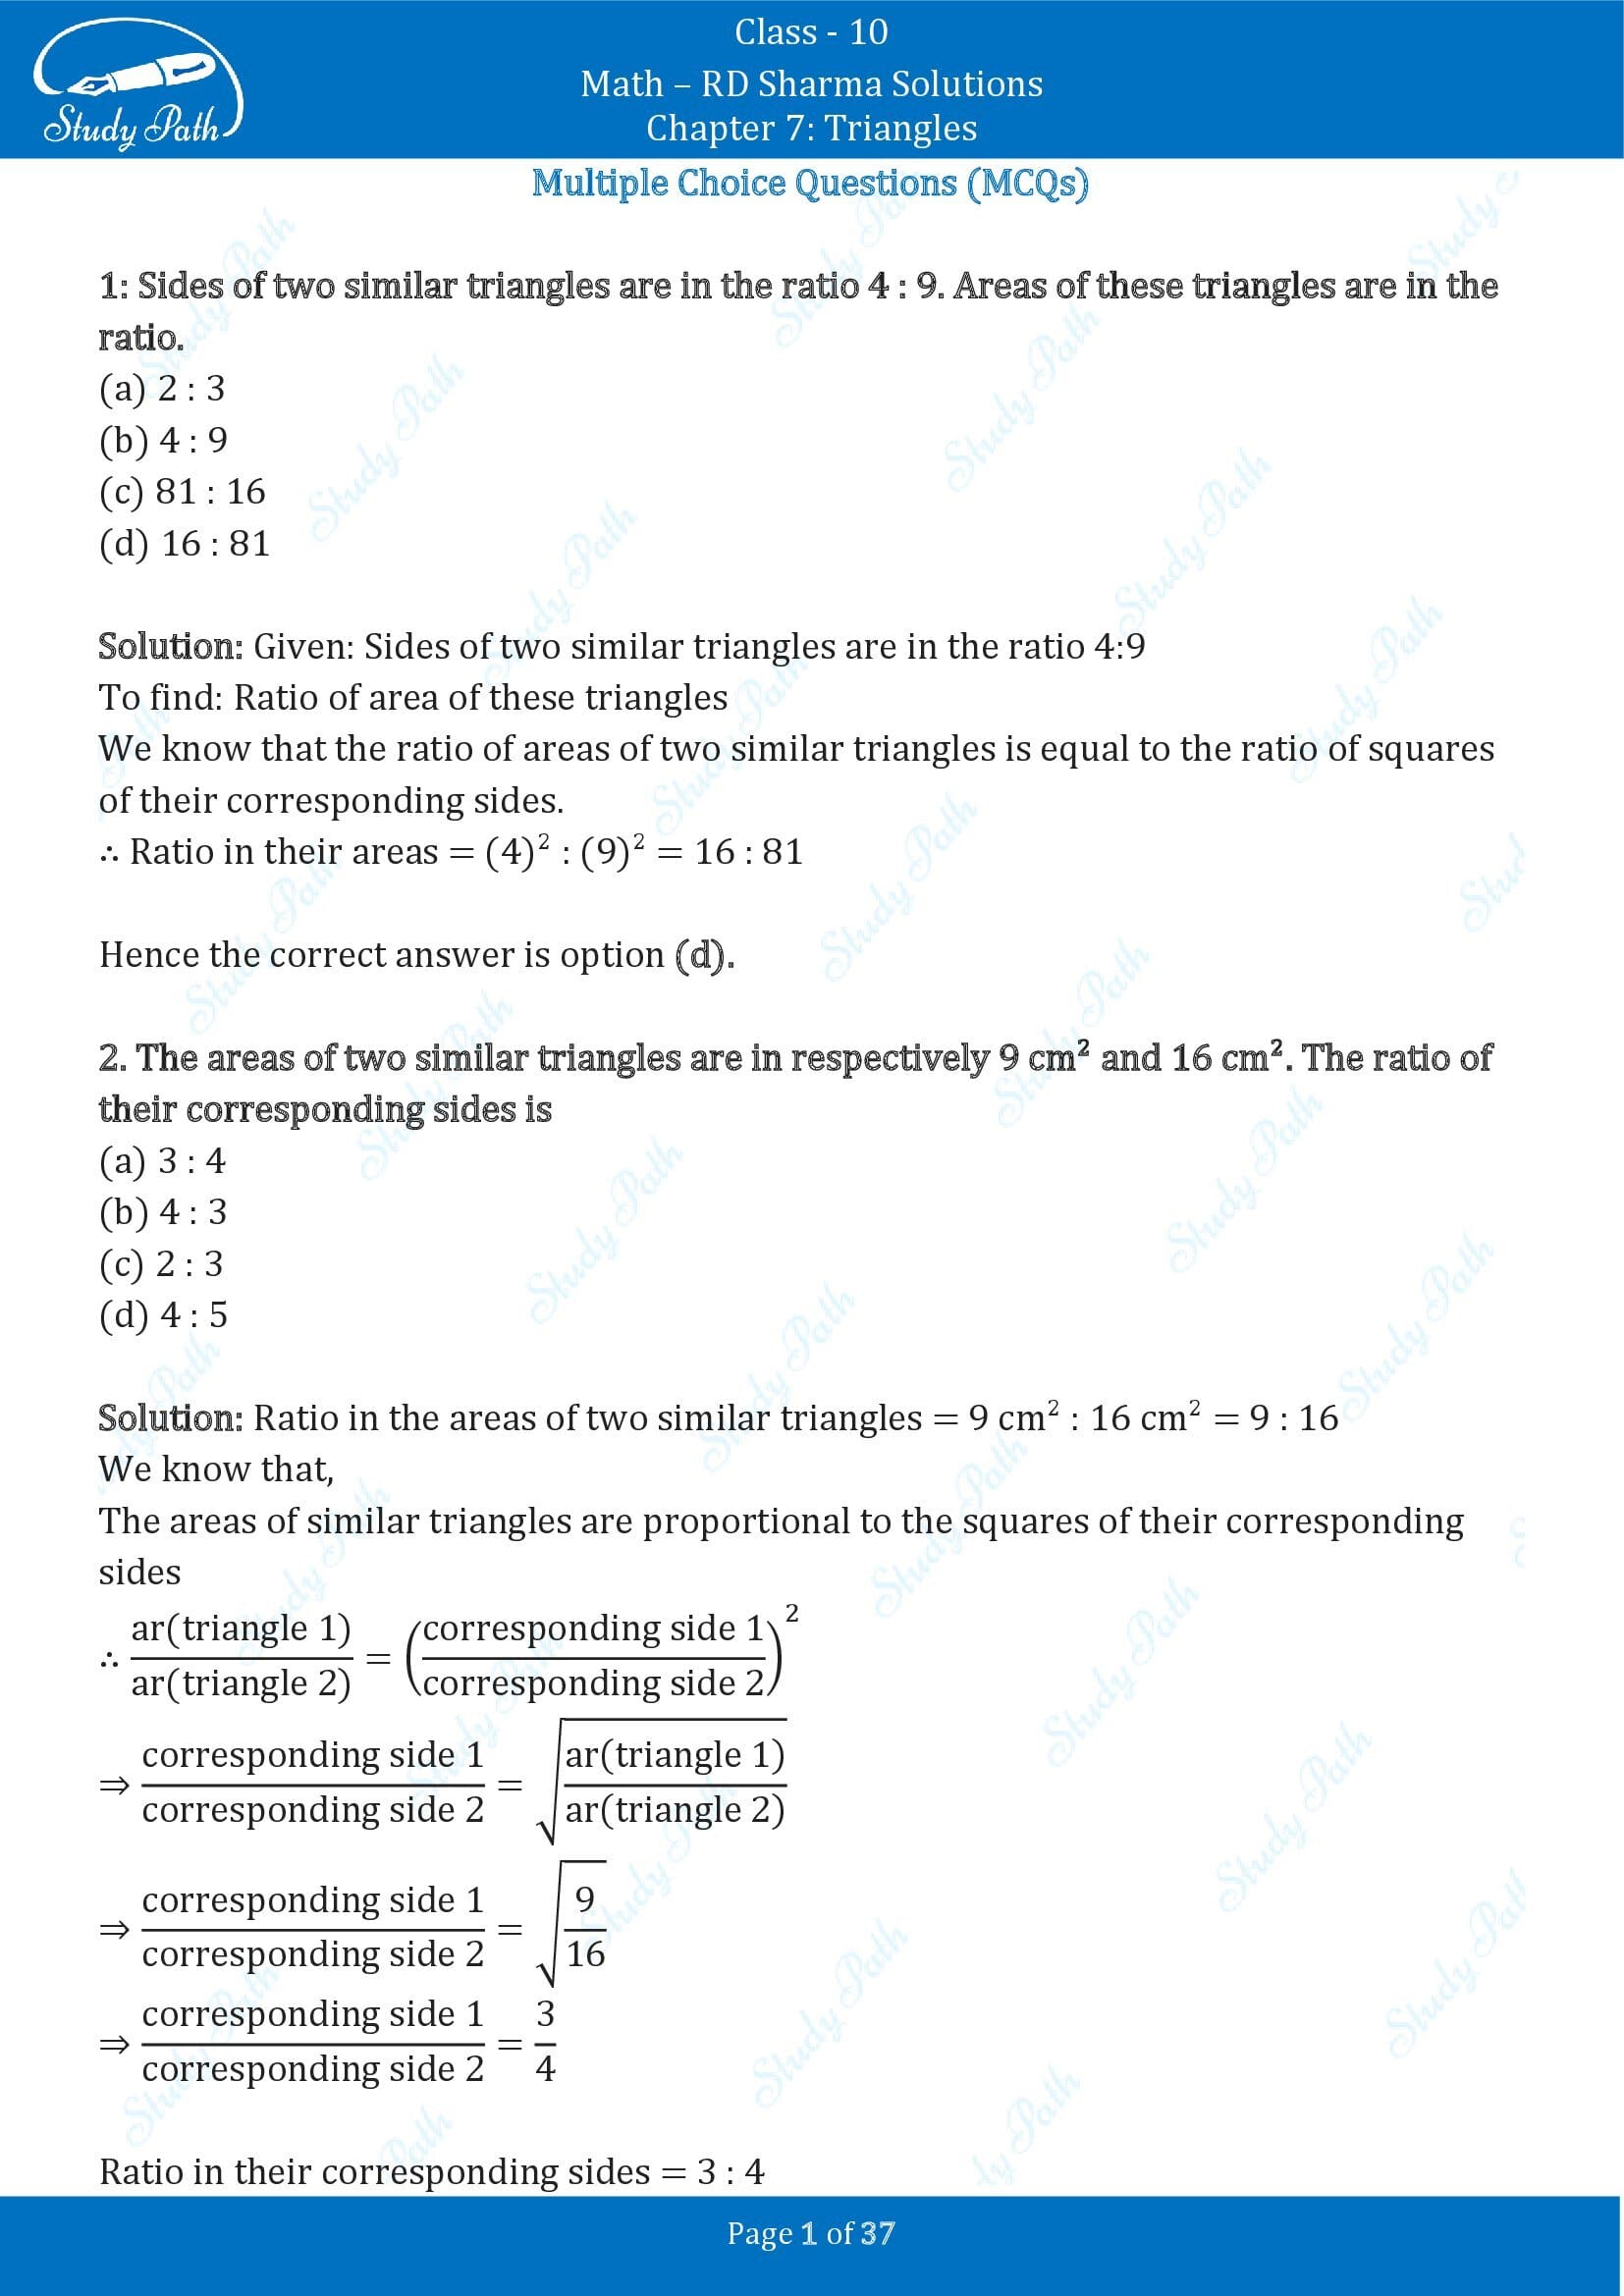 RD Sharma Solutions Class 10 Chapter 7 Triangles Multiple Choice Question MCQs 00001